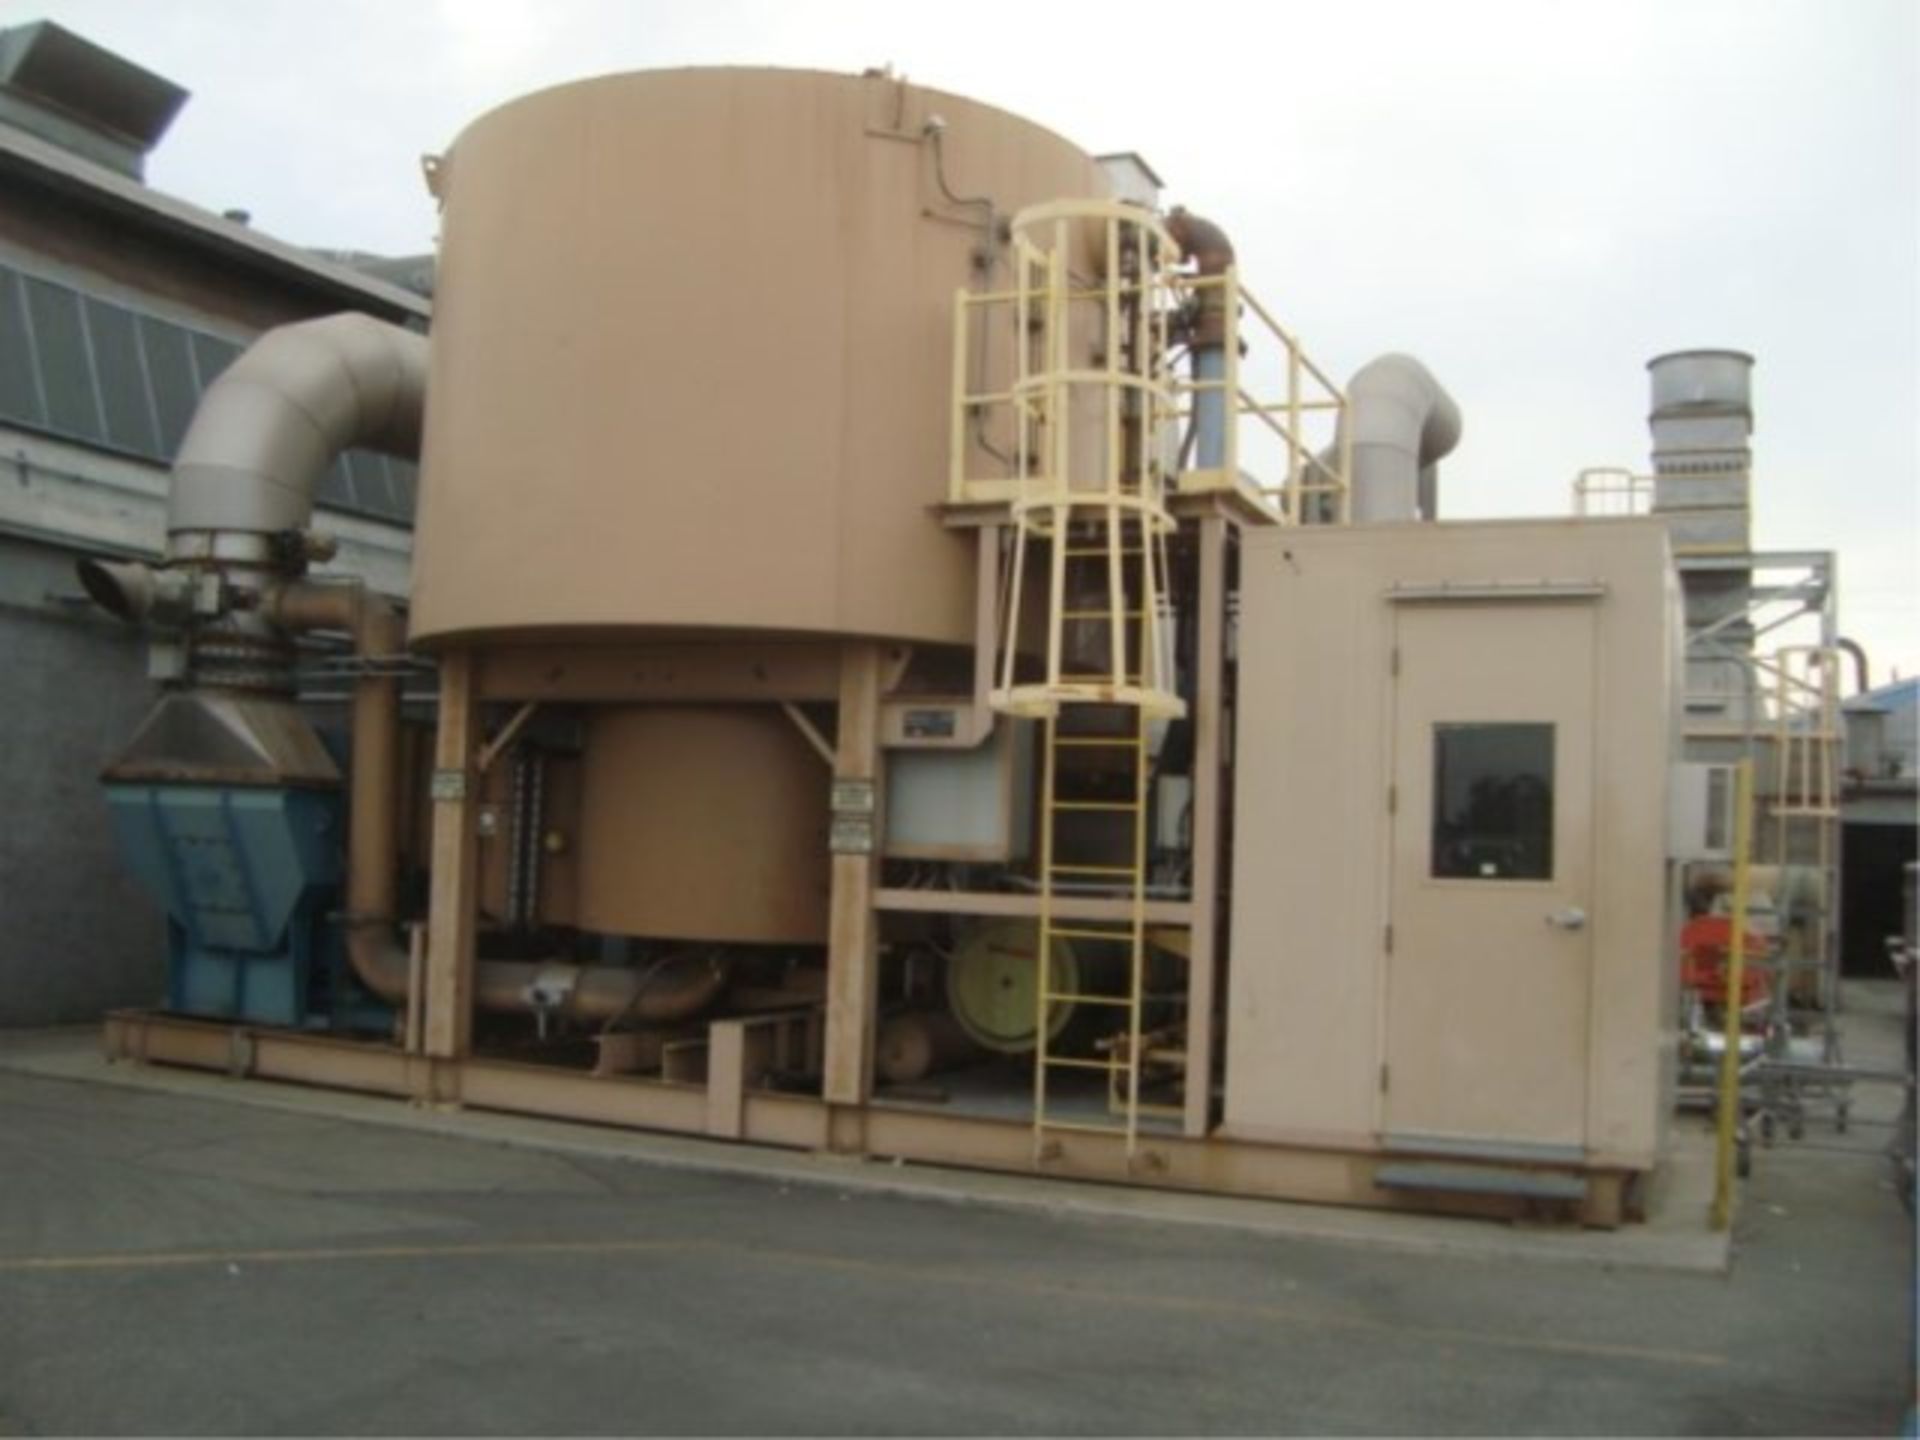 Reeco Re-Therm Fume Scrub Abatement System